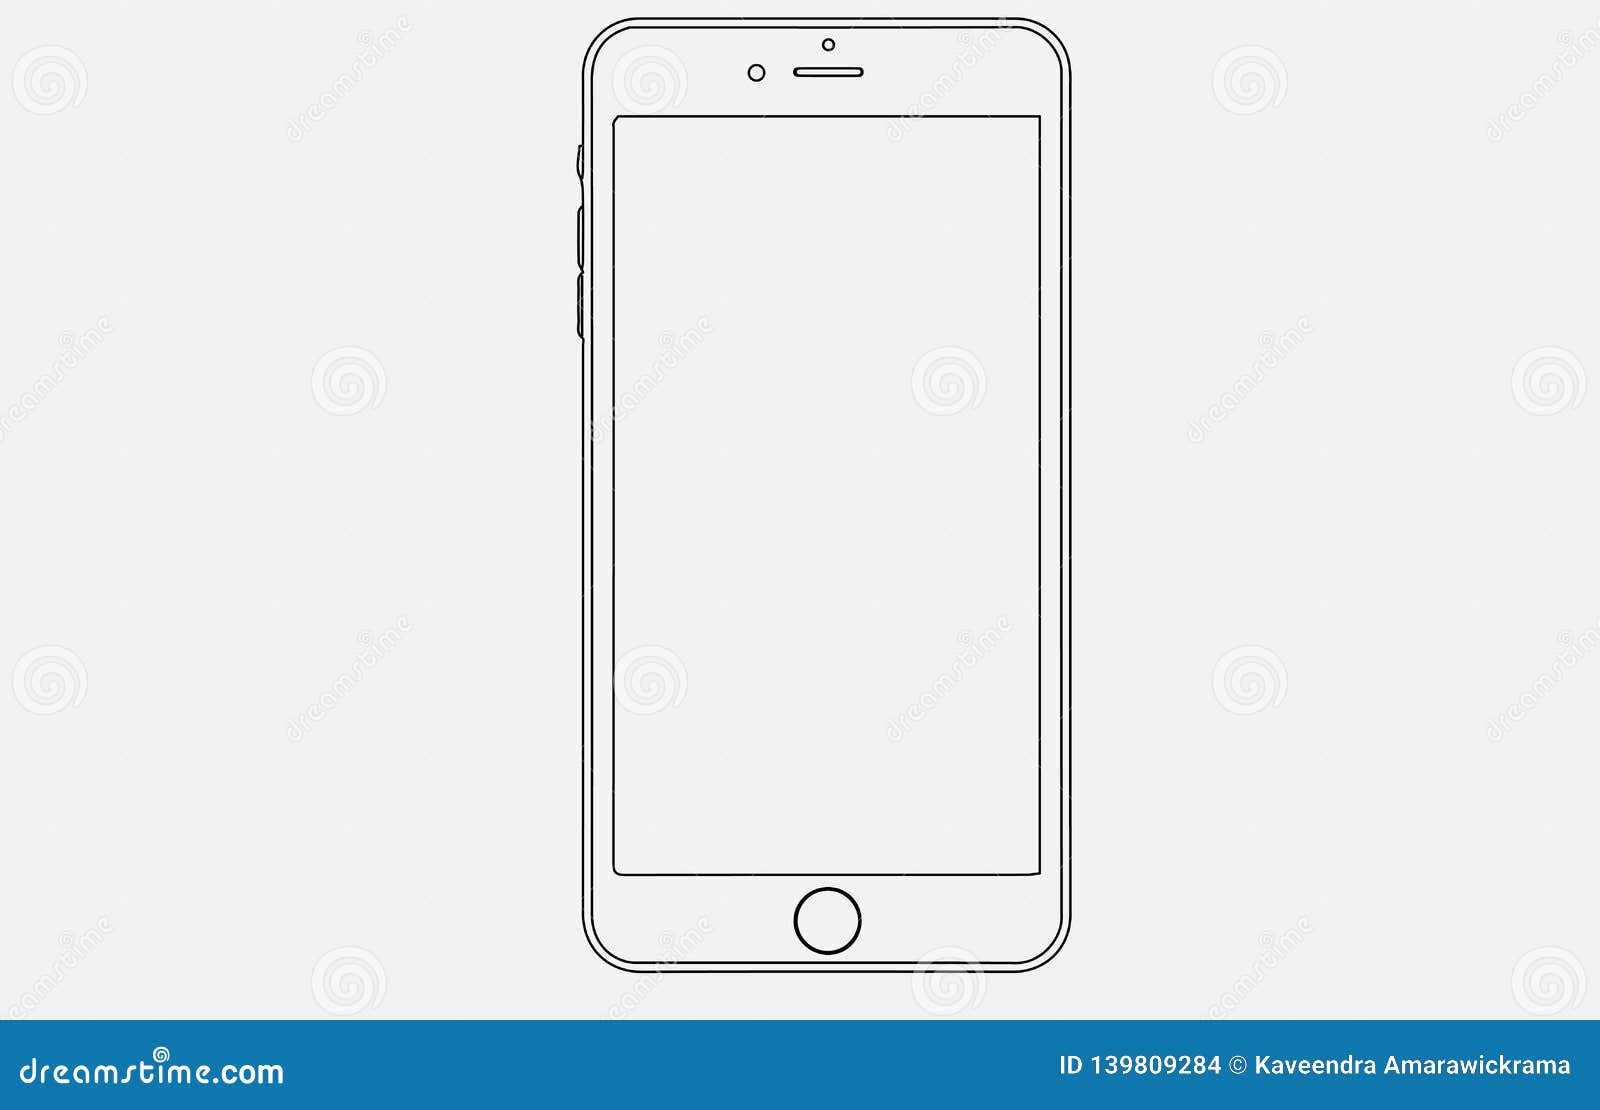 Abstract Iphone Illustration On White Stock Vector Illustration Of Business Drawn